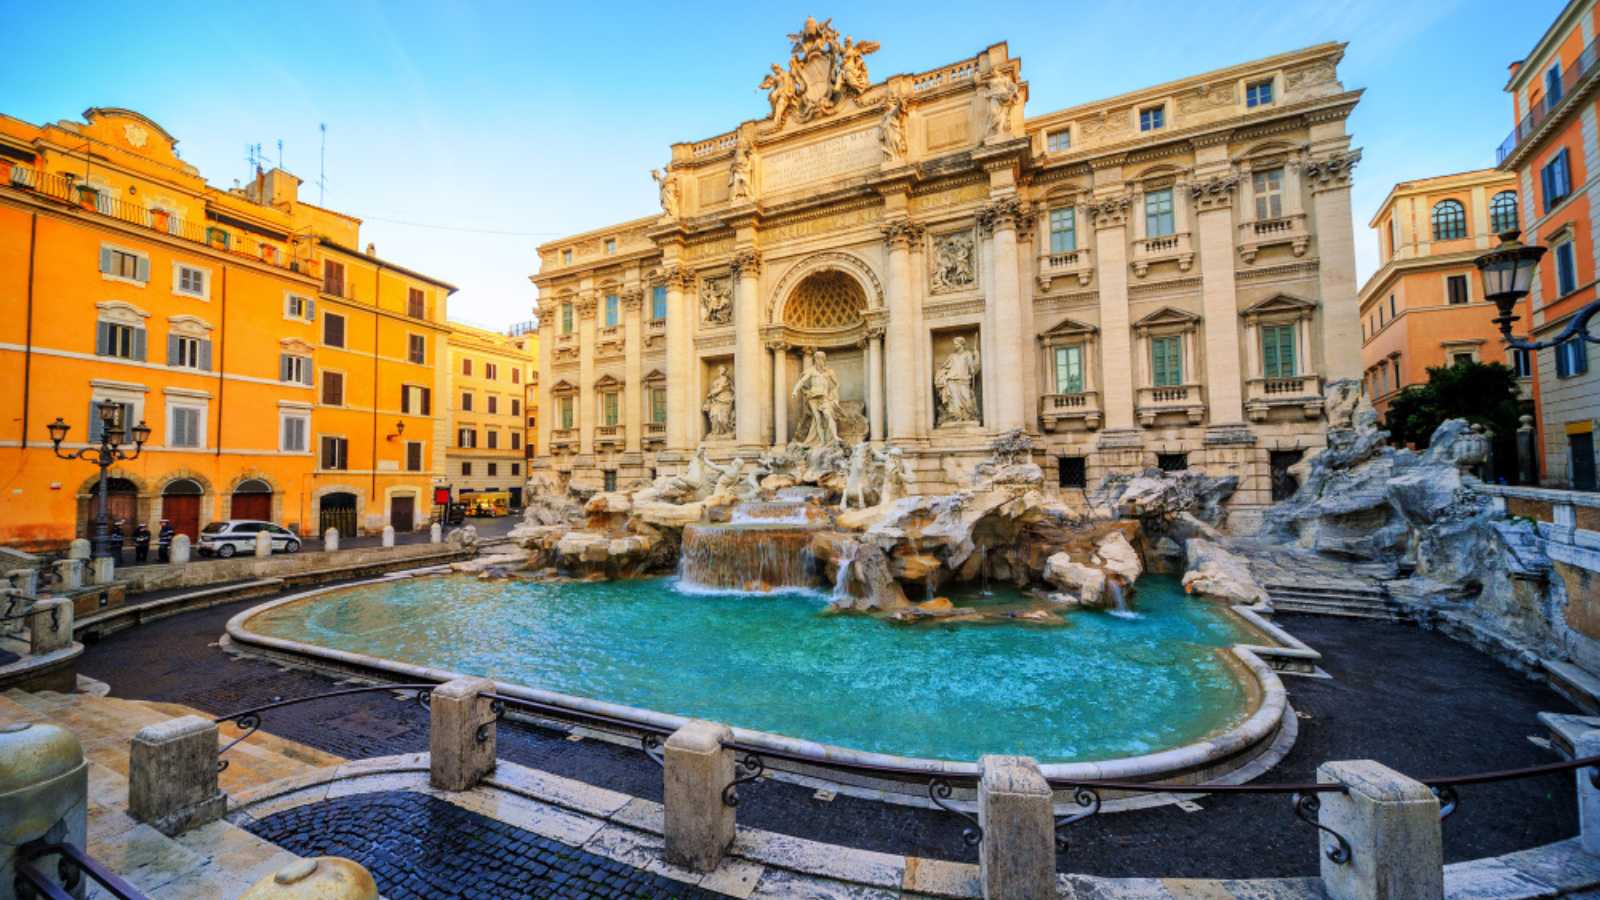 <p>The Colosseum, The Vatican, Trevi Fountain, and The Pantheon. Sadly, with so many historical landmarks centered in and near Rome, it was inevitable that relentless tourist exploitation would emerge. While many travelers swear by Rome, few will deny it has all the hallmarks of a tourist trap.</p>